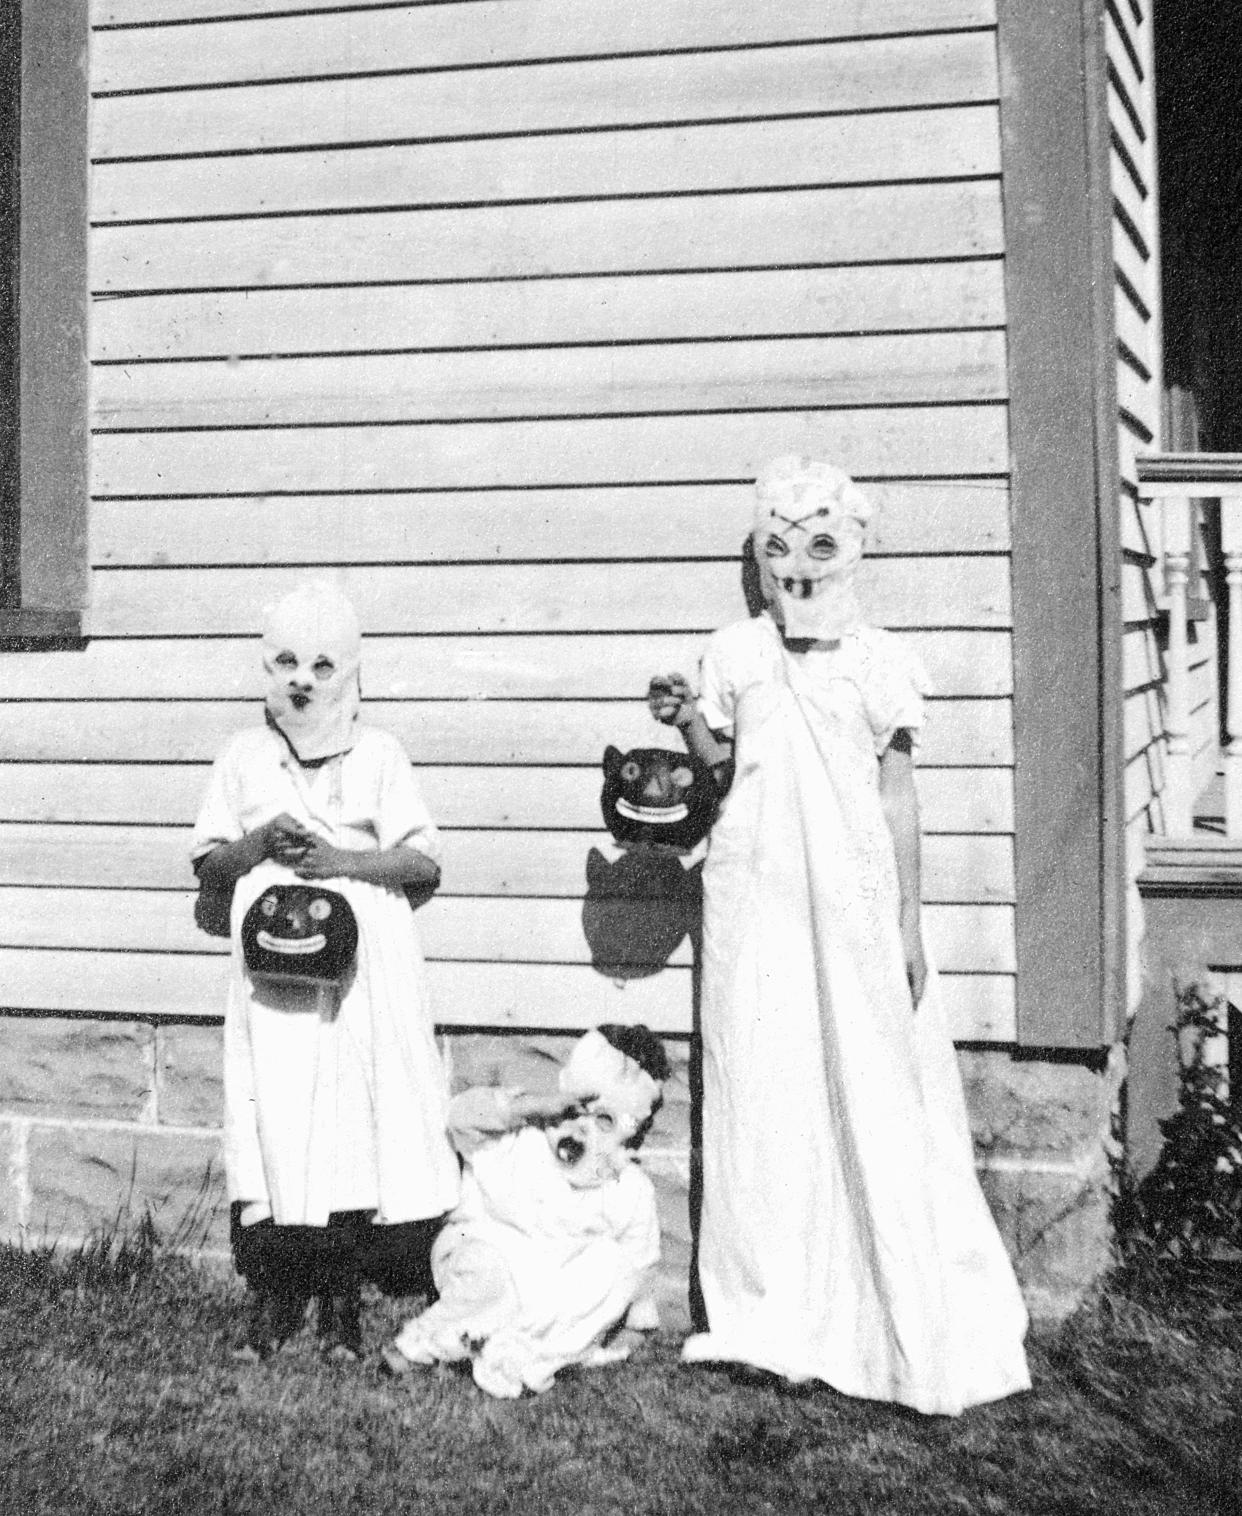 Taken around 1925, this photograph shows children wearing makeshift ghost costumes for Halloween. (Photo: Kirn Vintage Stock/Corbis via Getty Images)